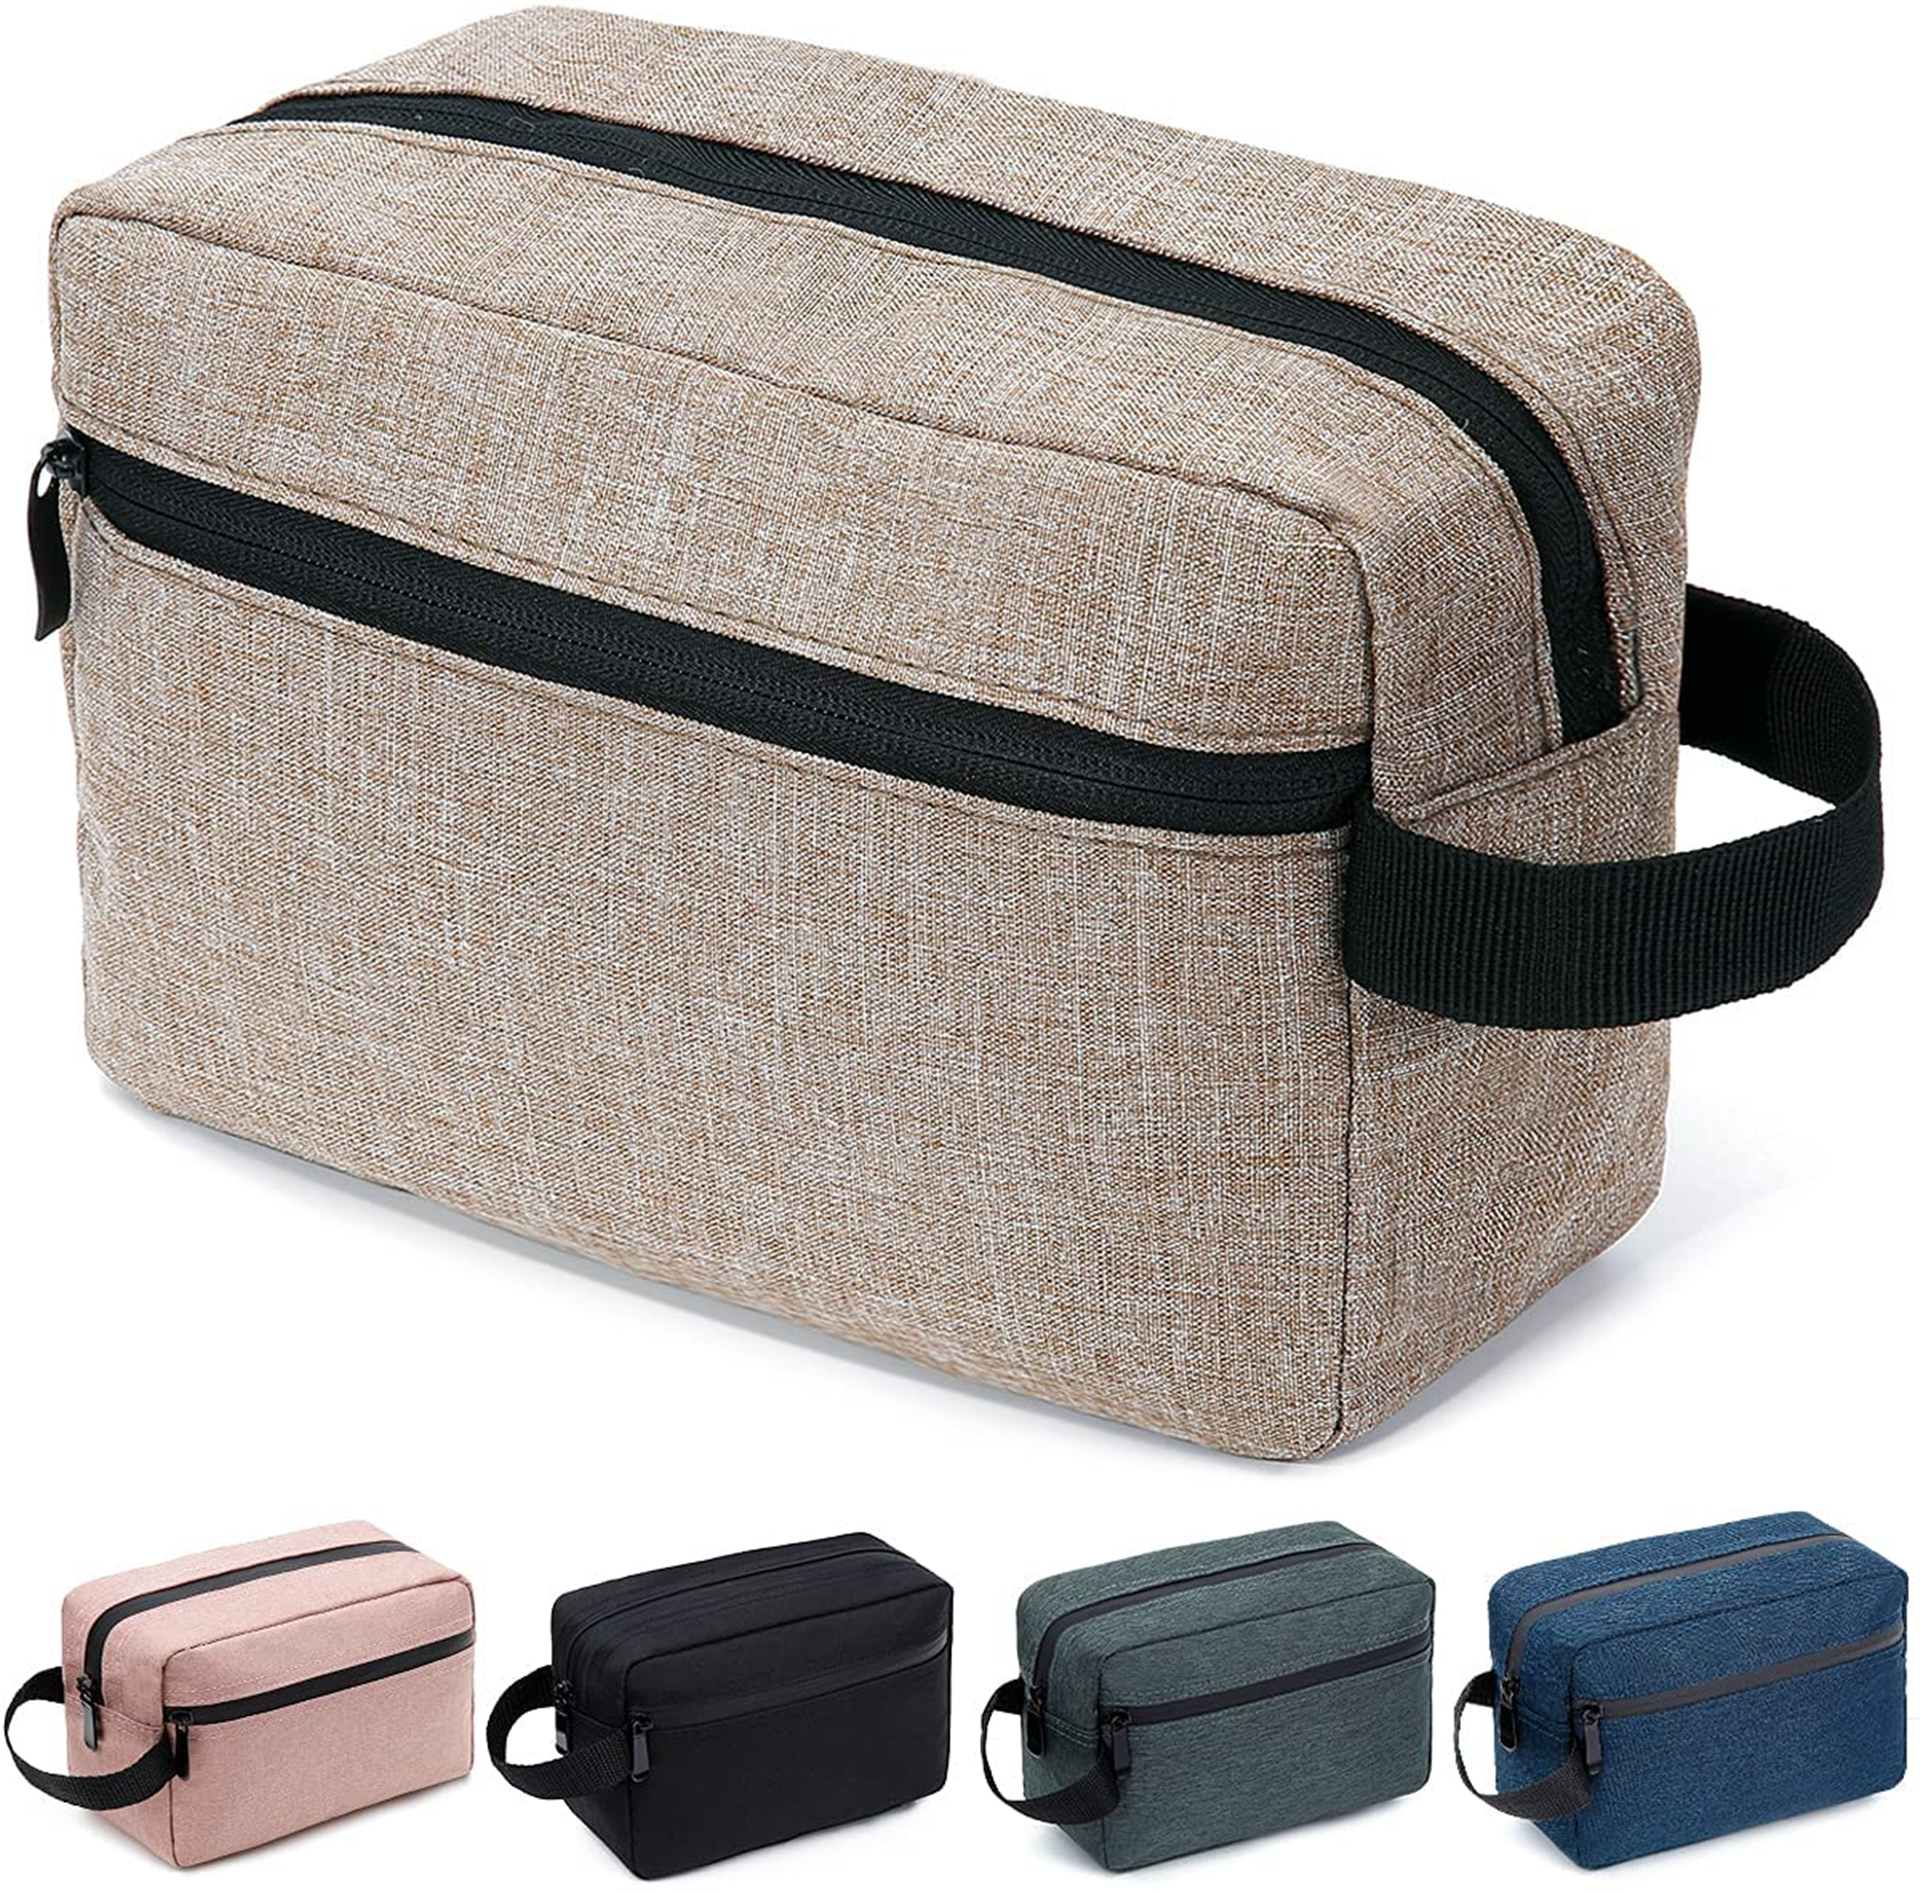 Travel Toiletry Bag for Women and Men Water-resistant Shaving Bag for Toiletries Accessories Foldable Storage Bags